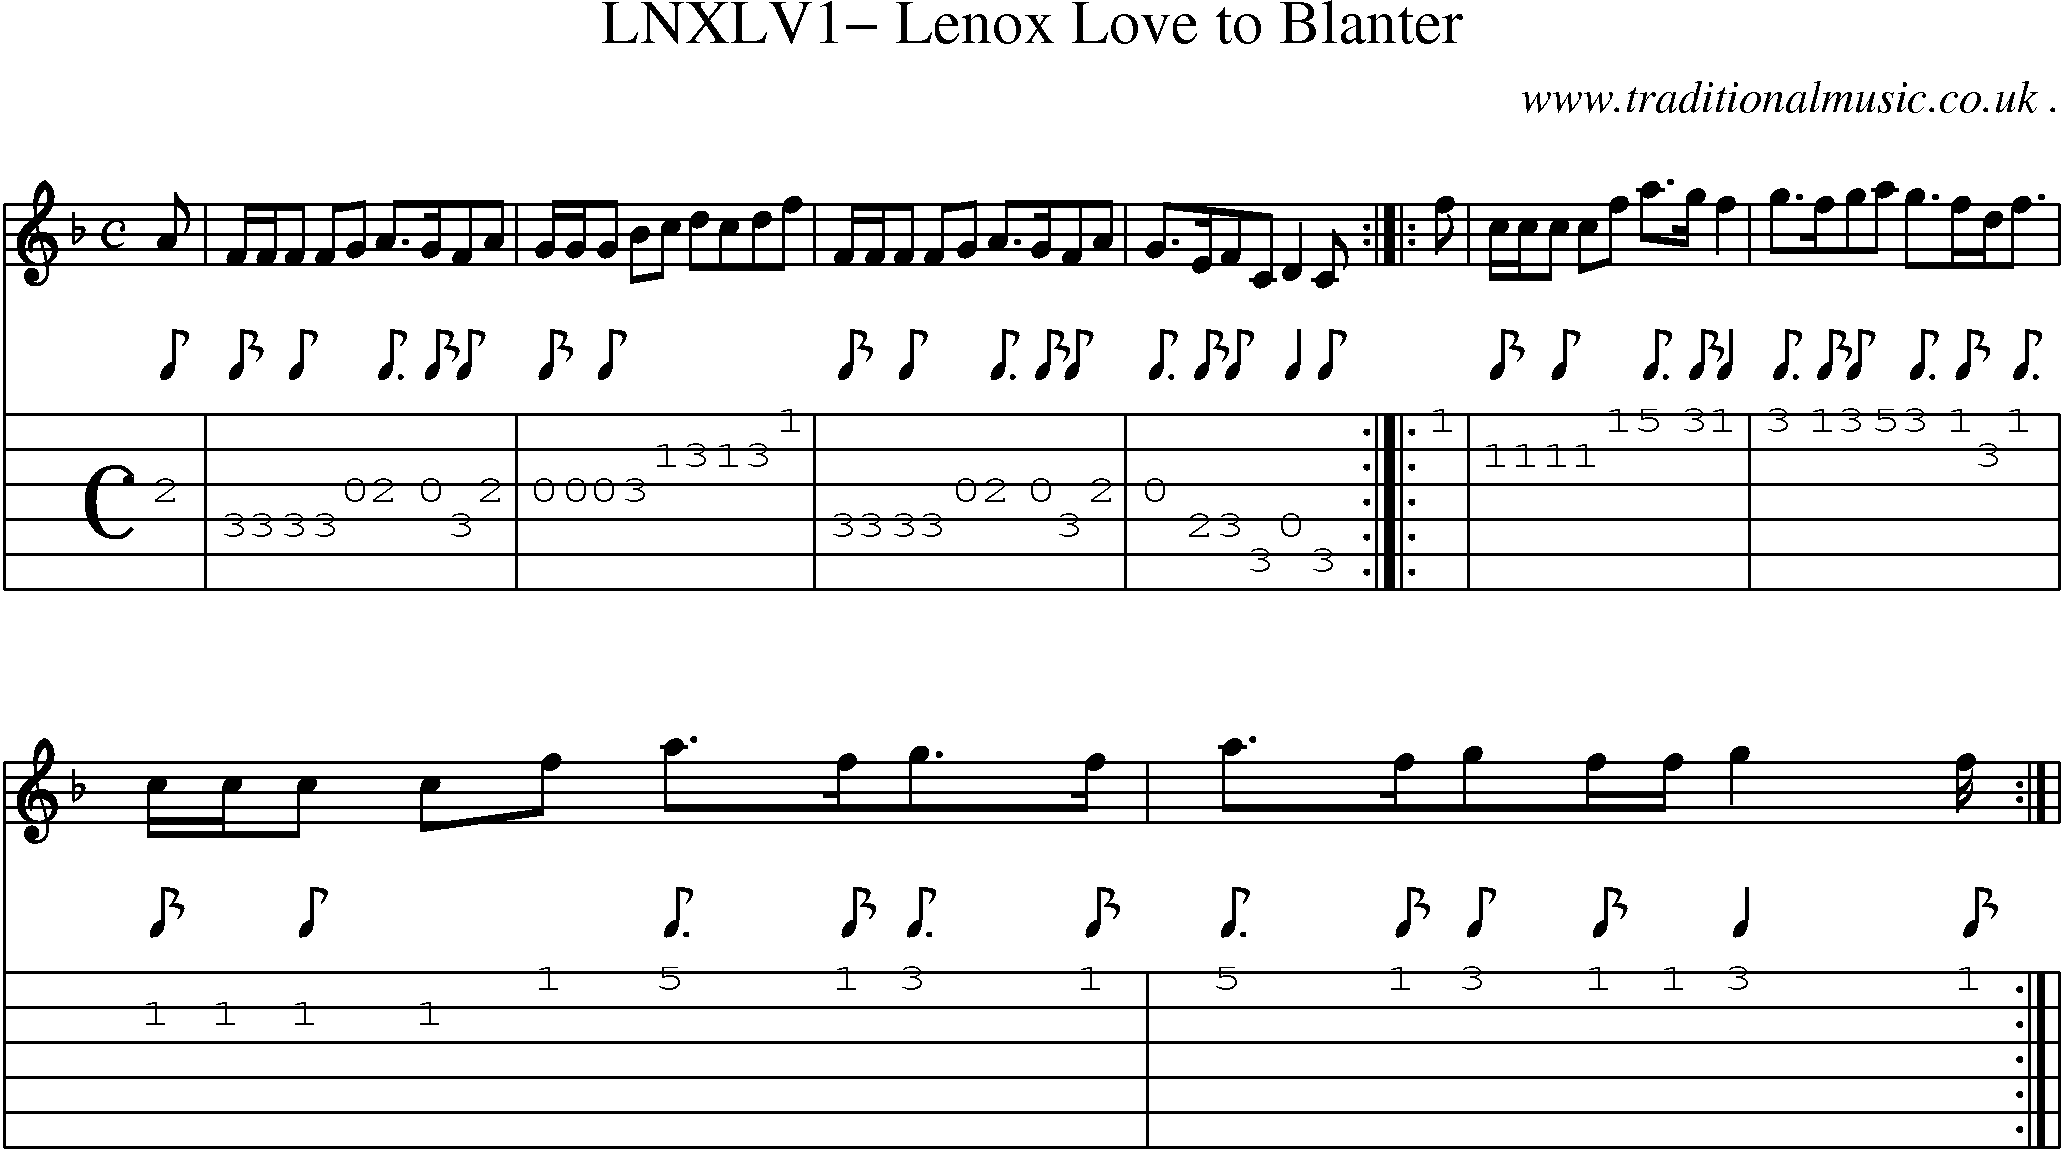 Sheet-Music and Guitar Tabs for Lnxlv1 Lenox Love To Blanter